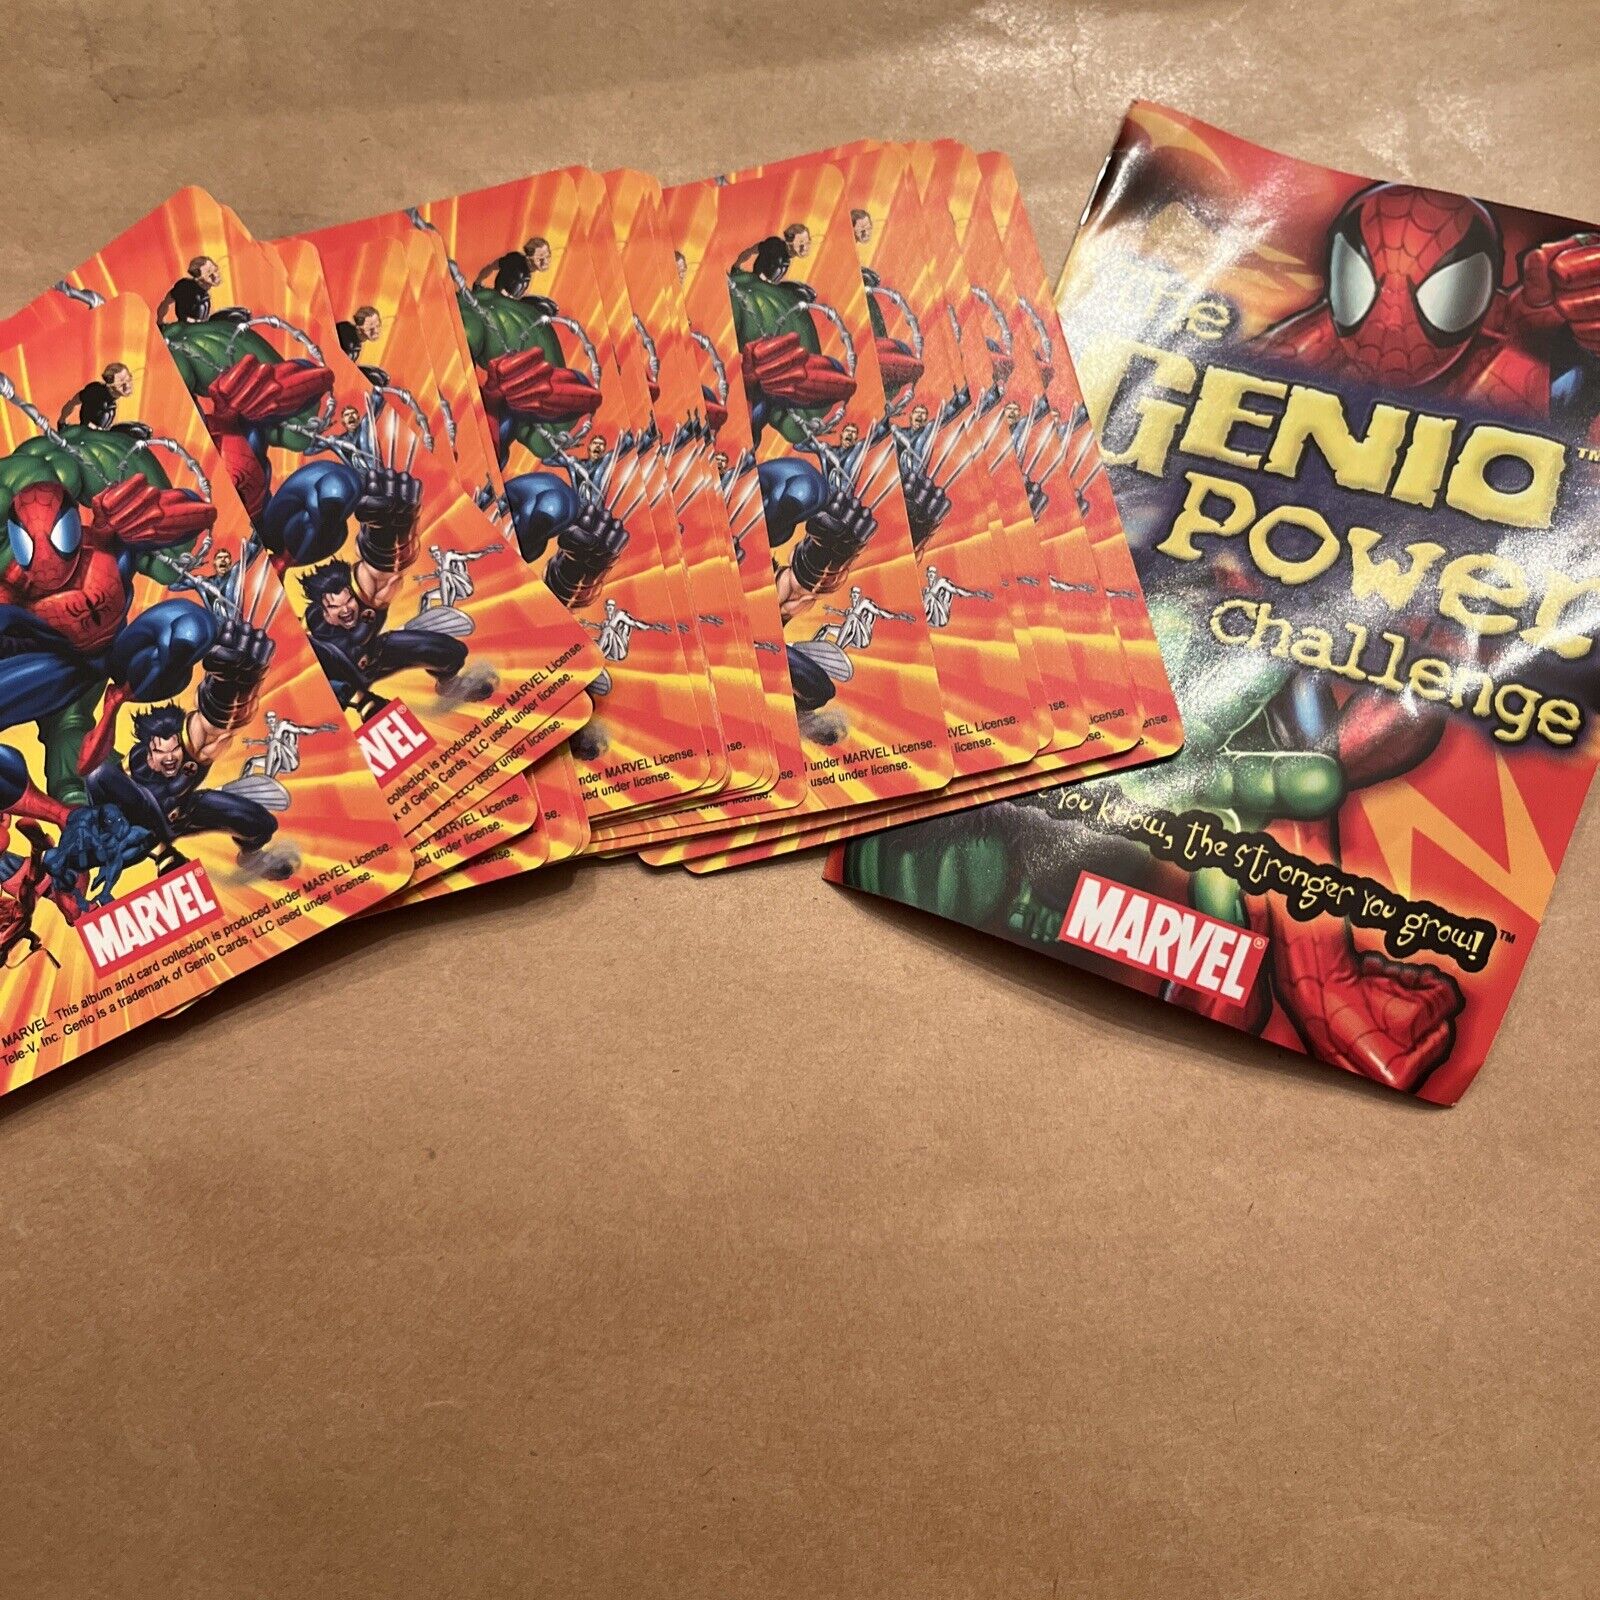 The Genio Power Challenge Card Game With All 36 Cards